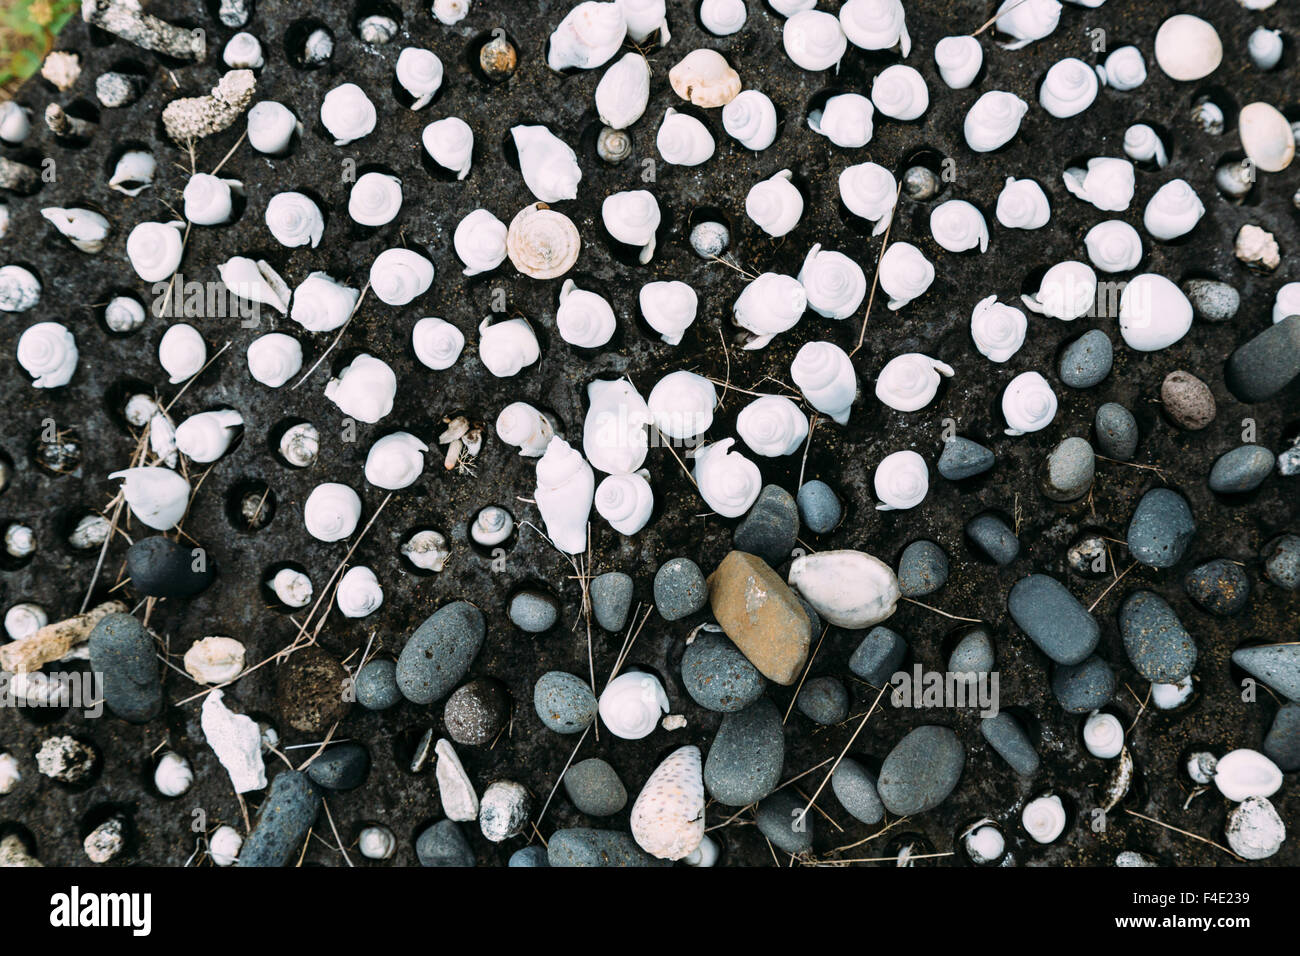 Pacific Ocean, French Polynesia, Society Islands, Raiatea. Shells placed in holes within volcanic rocks on altar at Taputapuatea Marae, once considered the central temple and religious center of Eastern Polynesia. Stock Photo